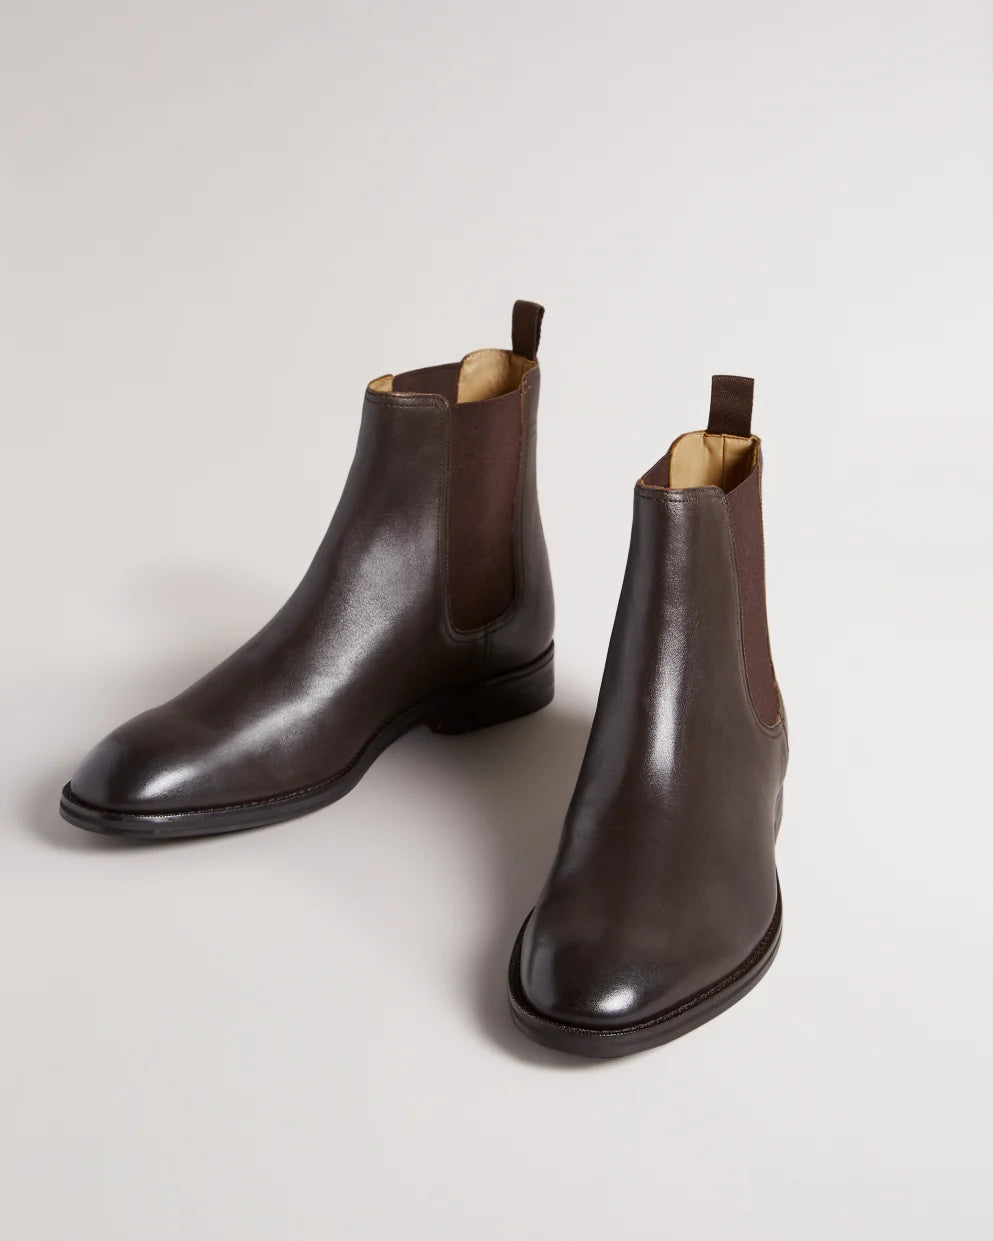 Ted Baker Maisonn Leather Boots | Choc